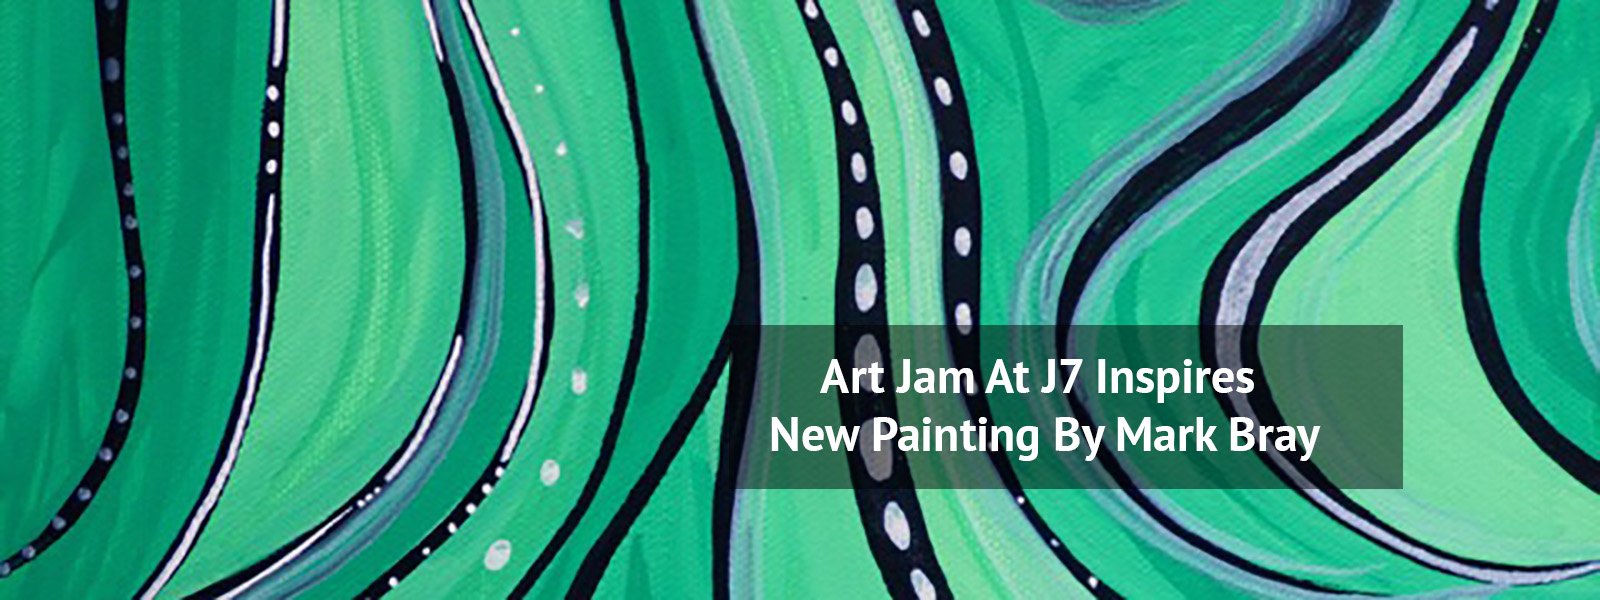 Art Jam At J7 Inspires New Painting By Mark Bray